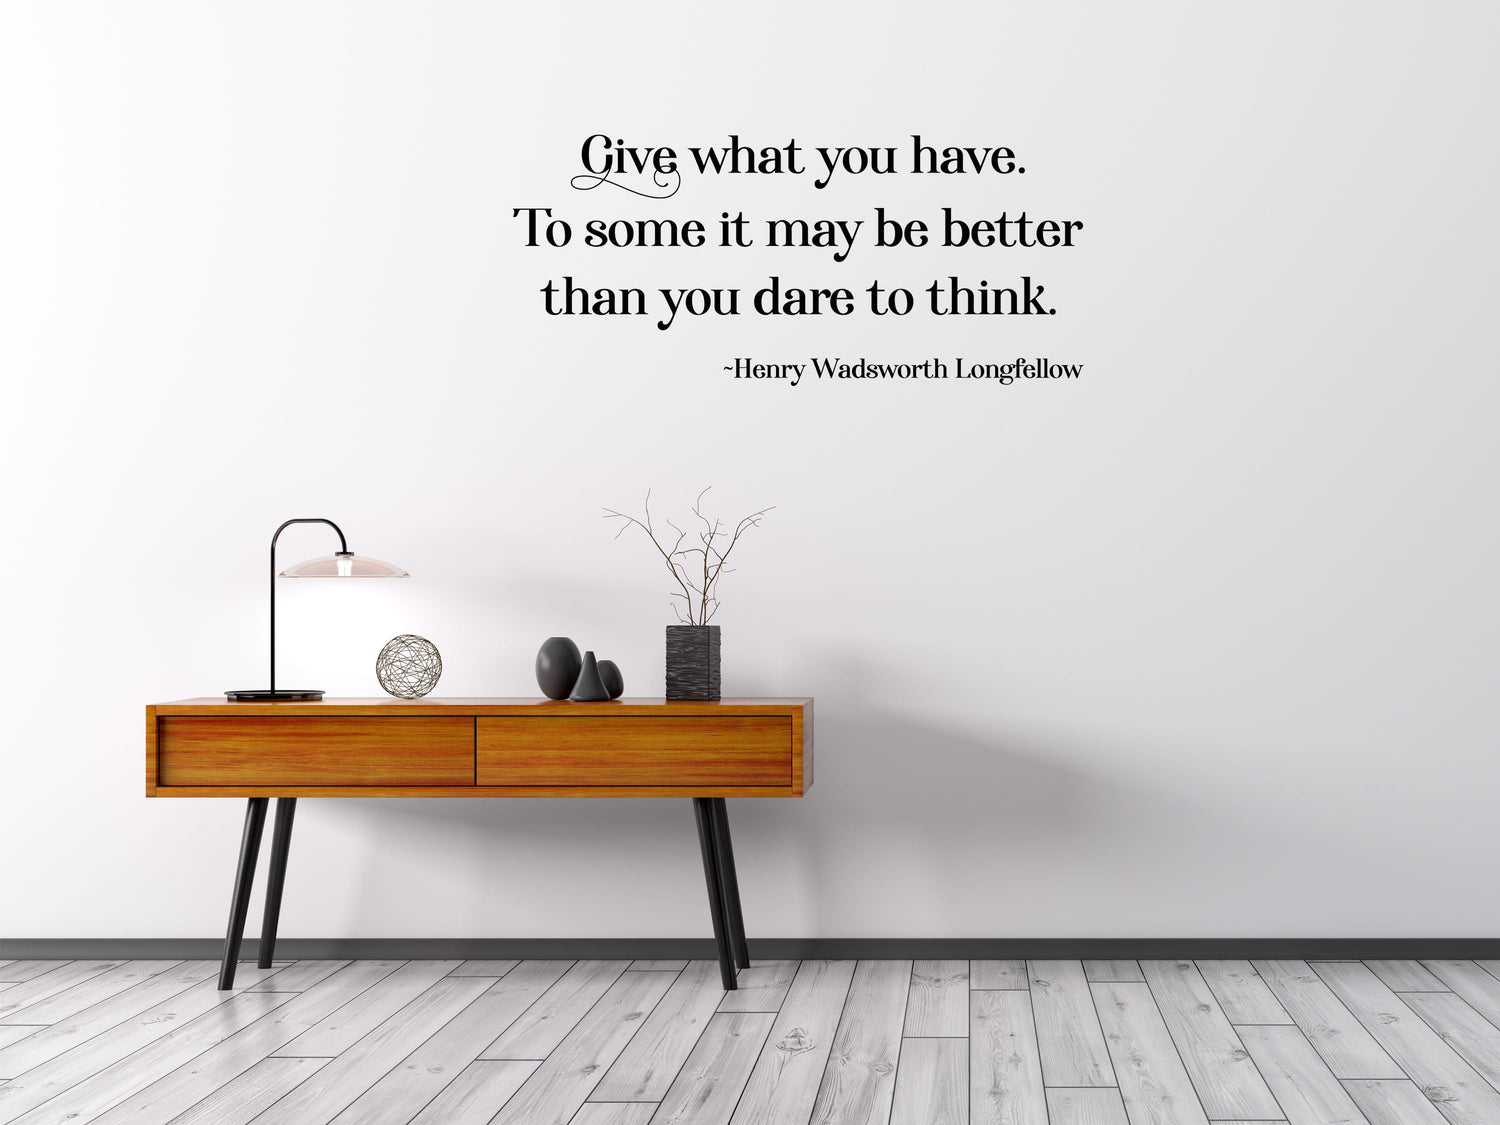 Give What You Have - Inspirational Wall Decals Vinyl Wall Decal Inspirational Wall Signs 